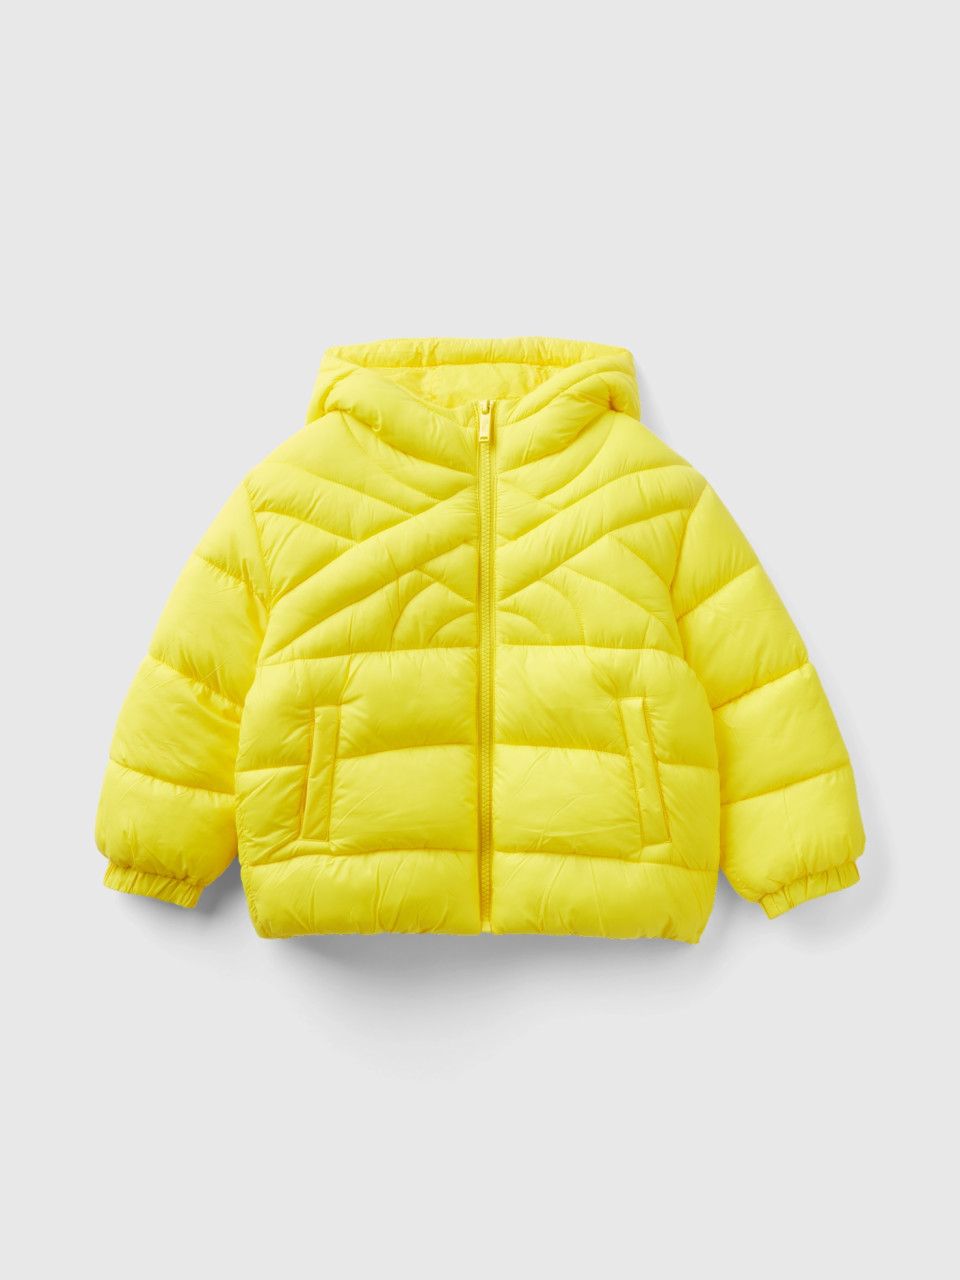 Benetton, Short Padded Jacket With Recycled Wadding, Yellow, Kids